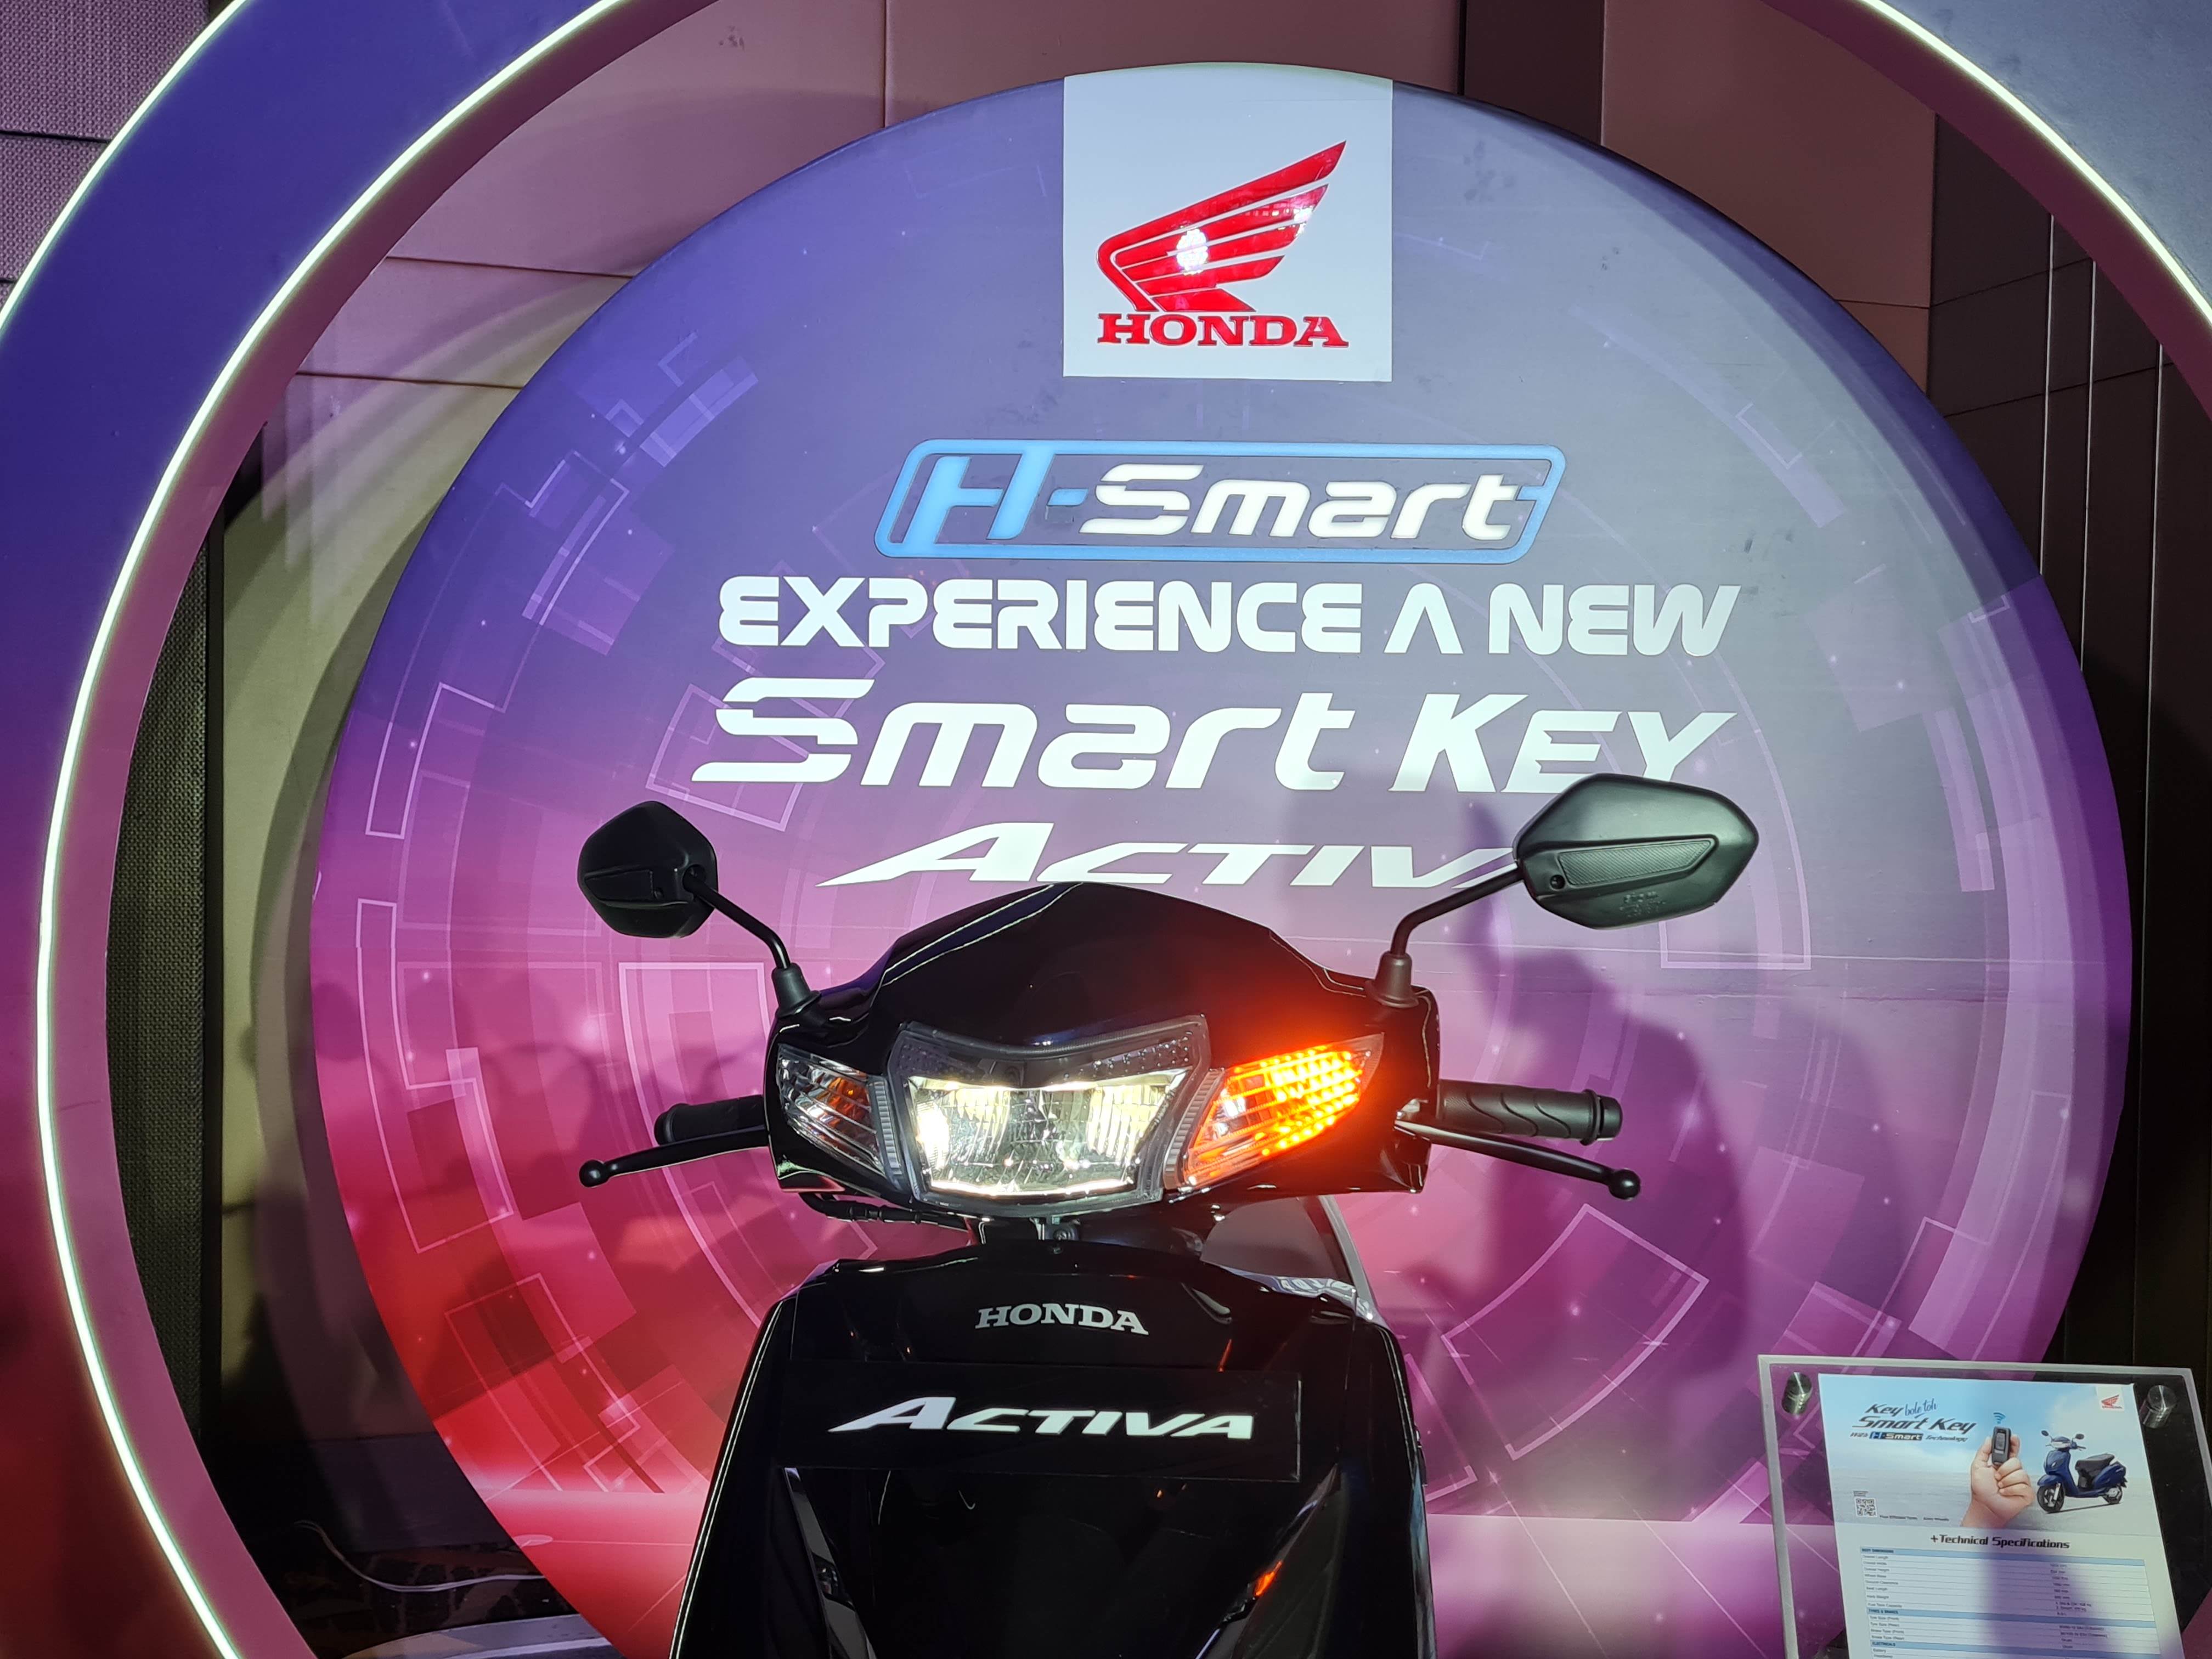 Honda's Activa switches to OBD-II compliance ahead of April 1